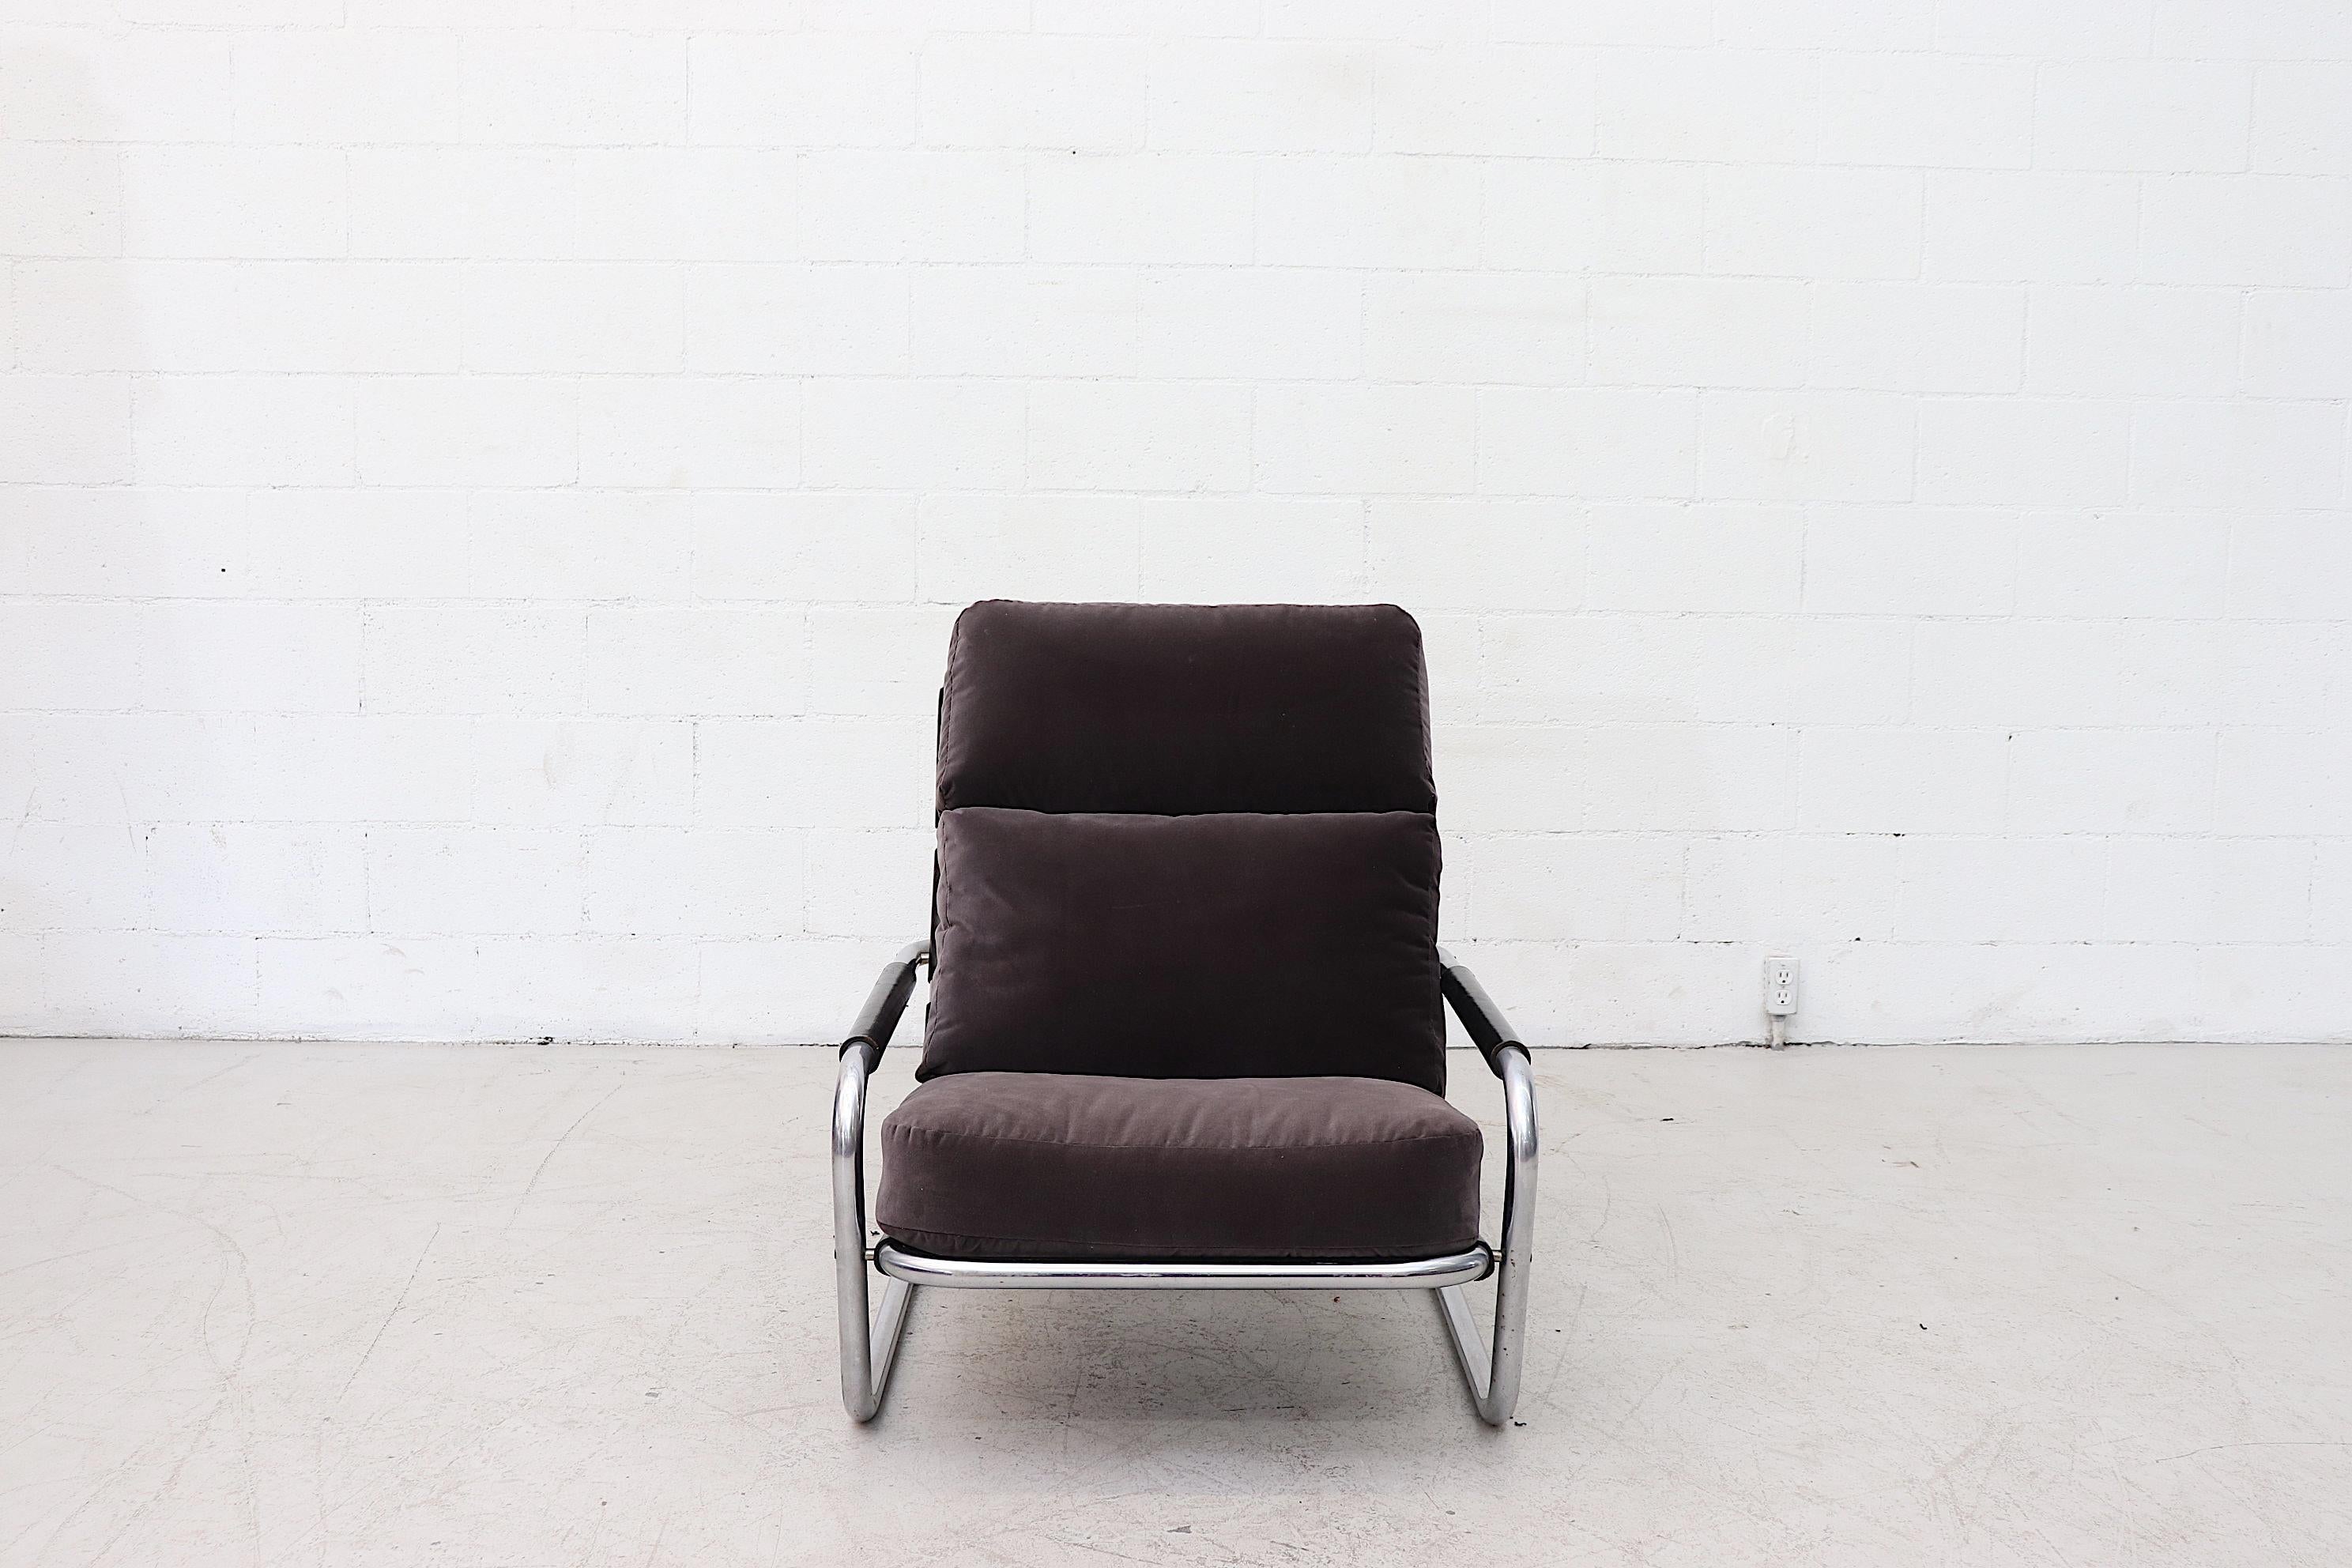 Jan des Bouvries masculine lounge chair newly upholstered dark grey velvet cushions with fat tubular chrome frame and black leather support. Thick leather wrapped arm rests in well worn black leather. Model number S601 also known as the 